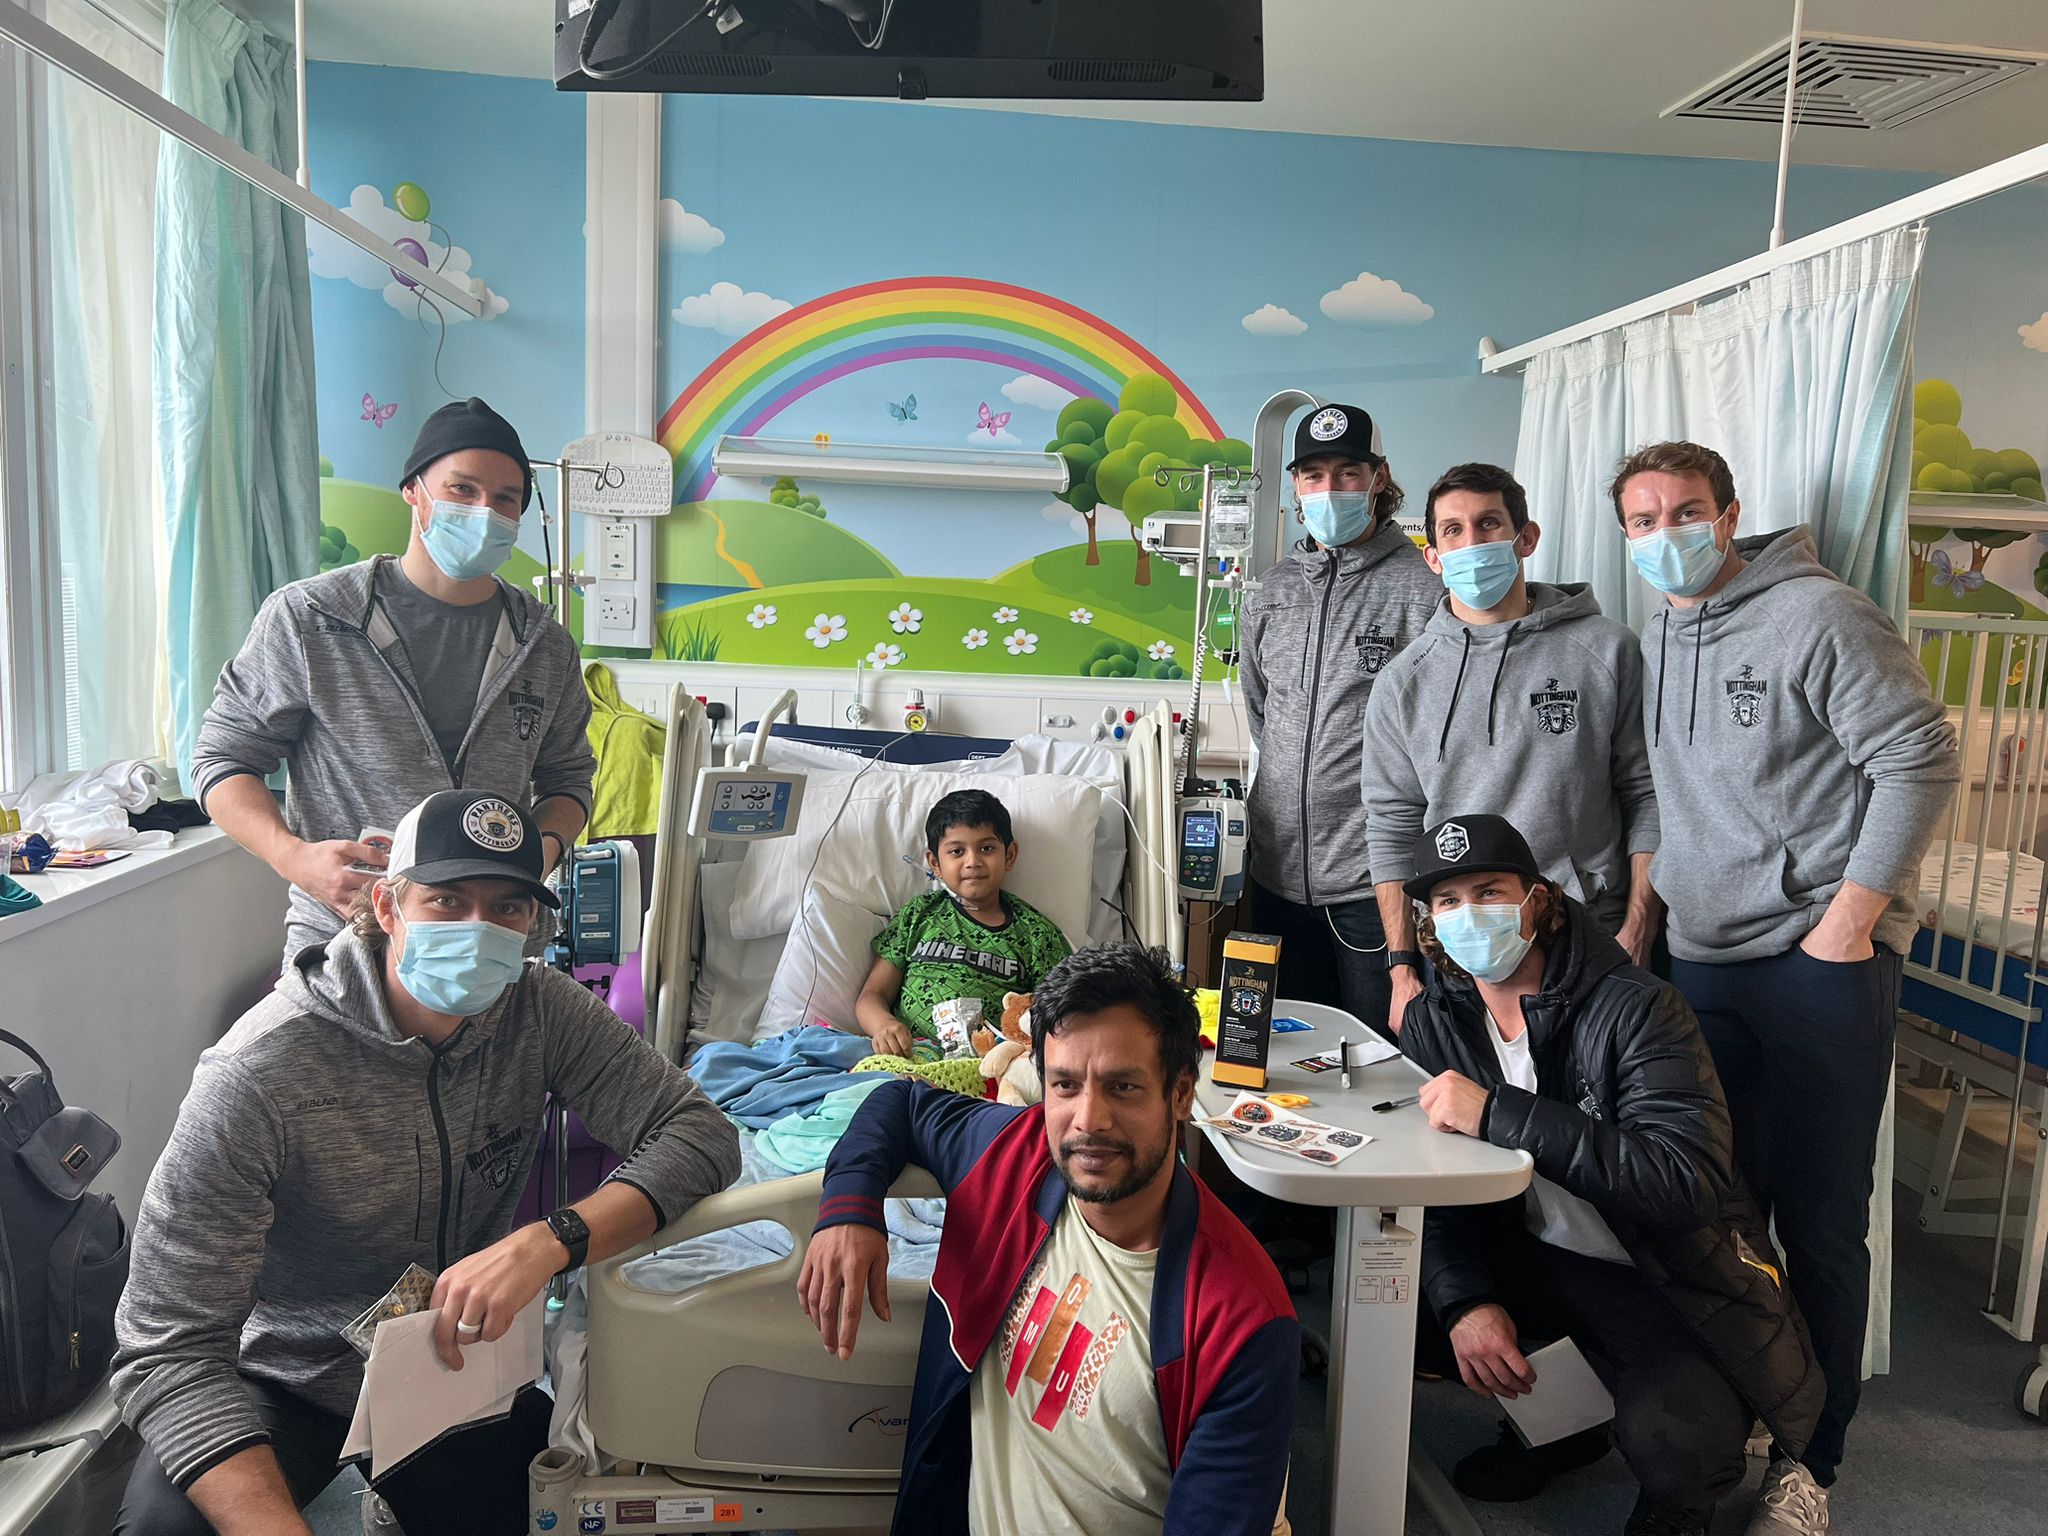 PANTHERS MAKE VISIT TO THE HOSPITAL Top Image